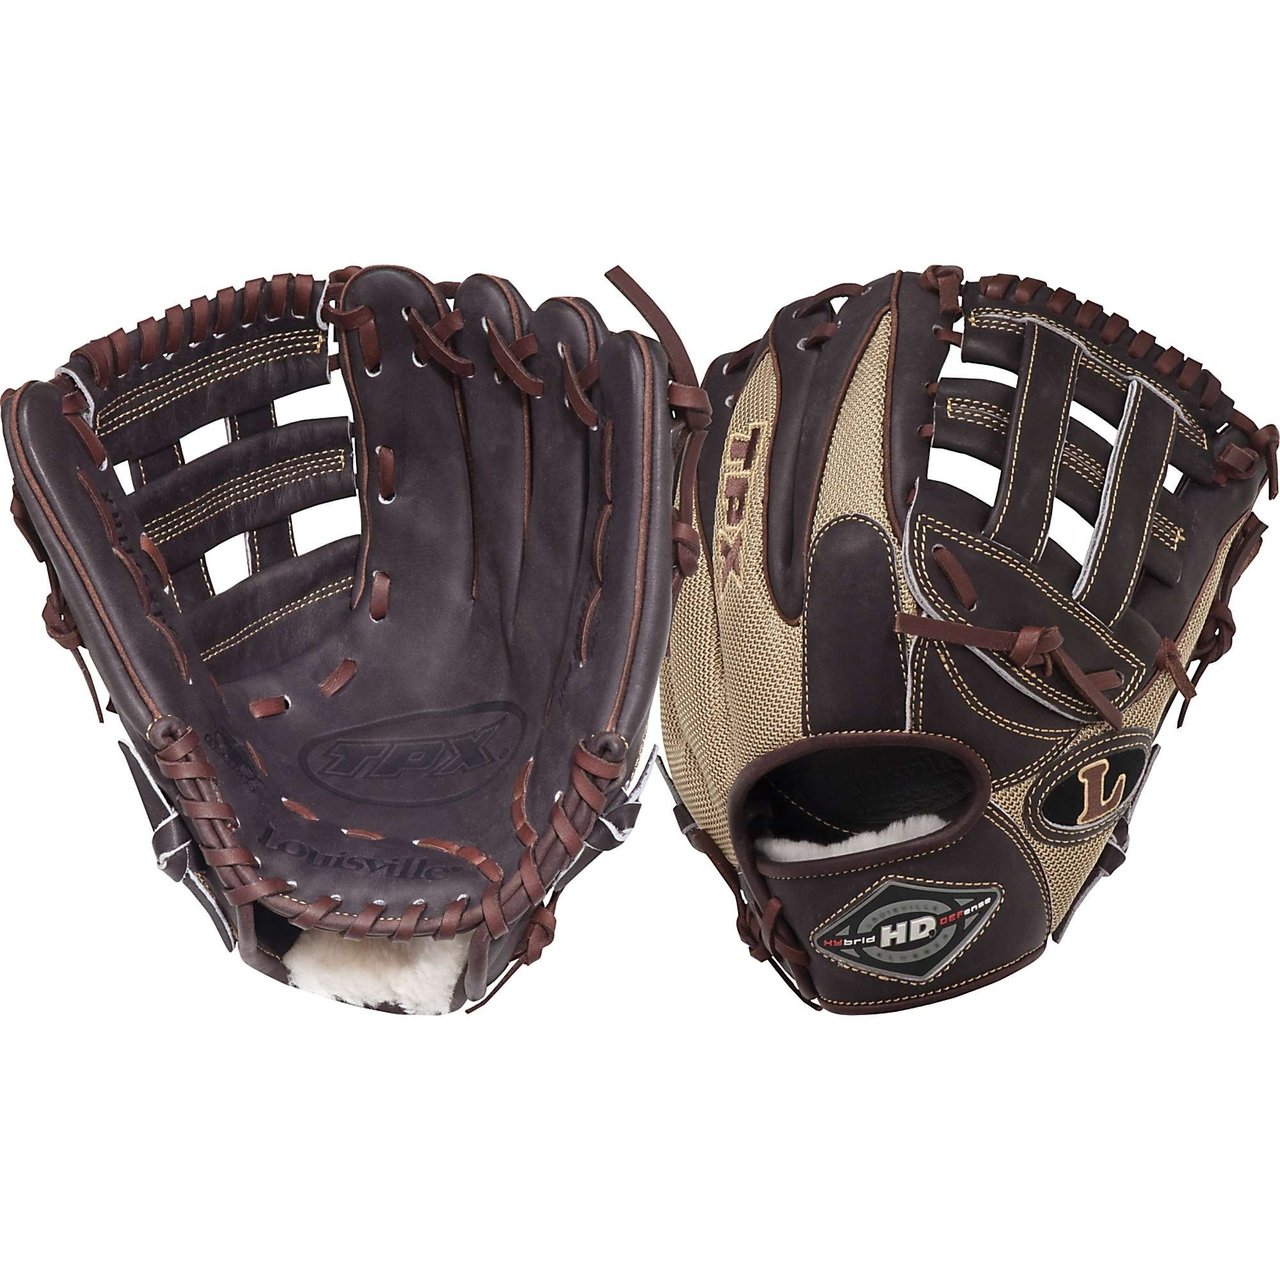 Louisville Slugger XH1175KGD 11 34 Inch Hybrid Defense Baseball Glove : Louisville Slugger 11.75 HD9 Hybrid Defense KastanieGold Baseball Glove for the right handed thrower.